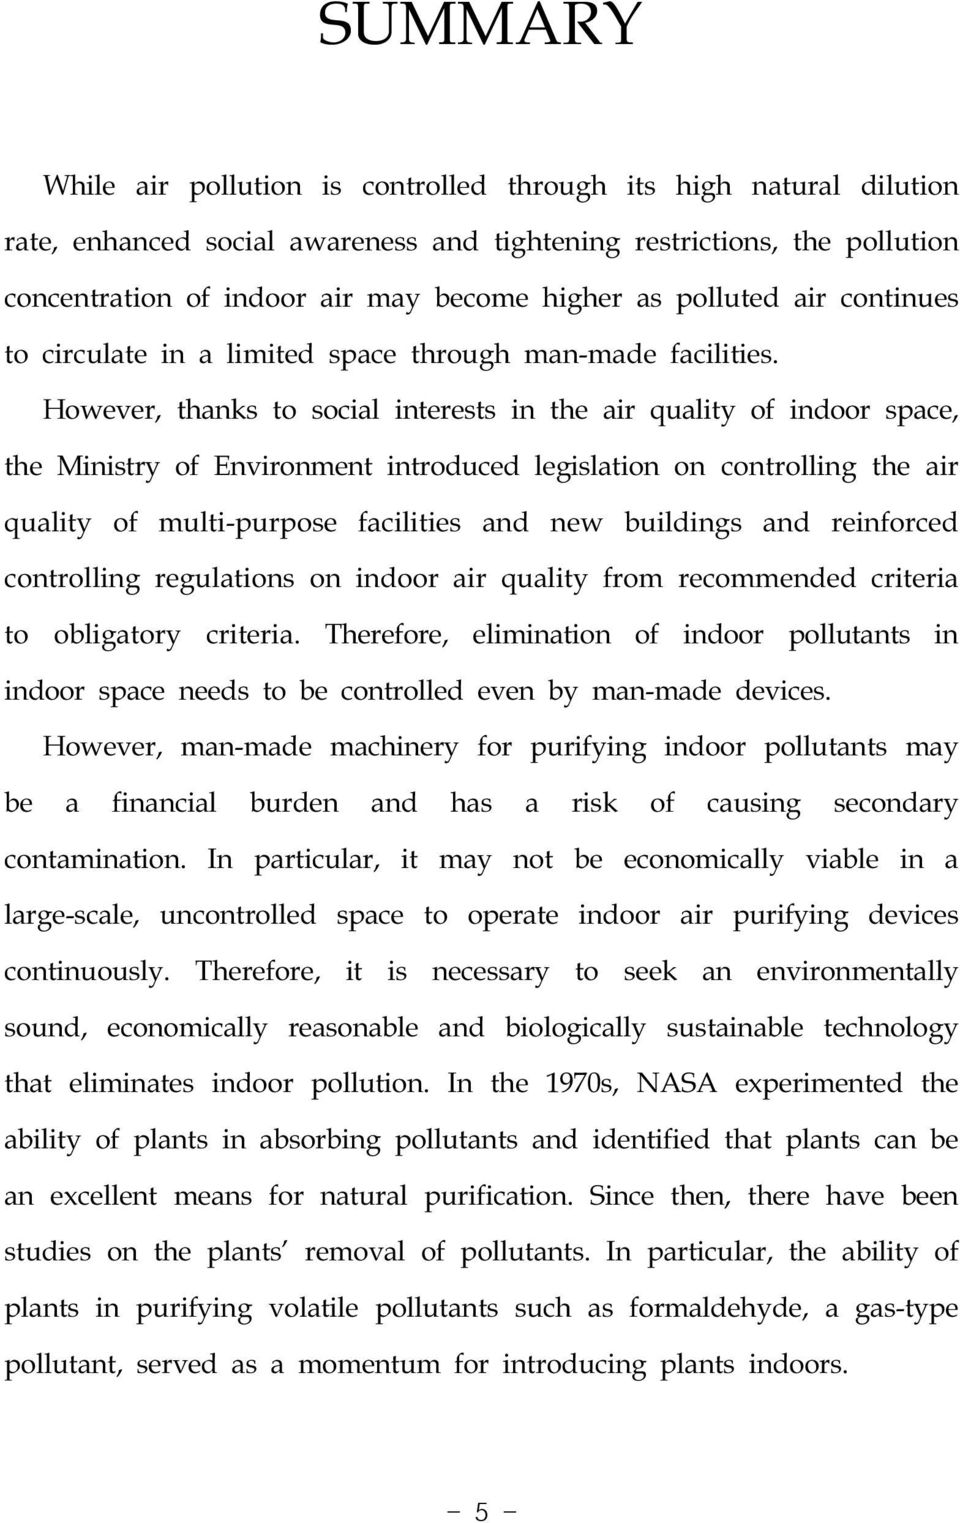 However, thanks to social interests in the air quality of indoor space, the Ministry of Environment introduced legislation on controlling the air quality of multi-purpose facilities and new buildings